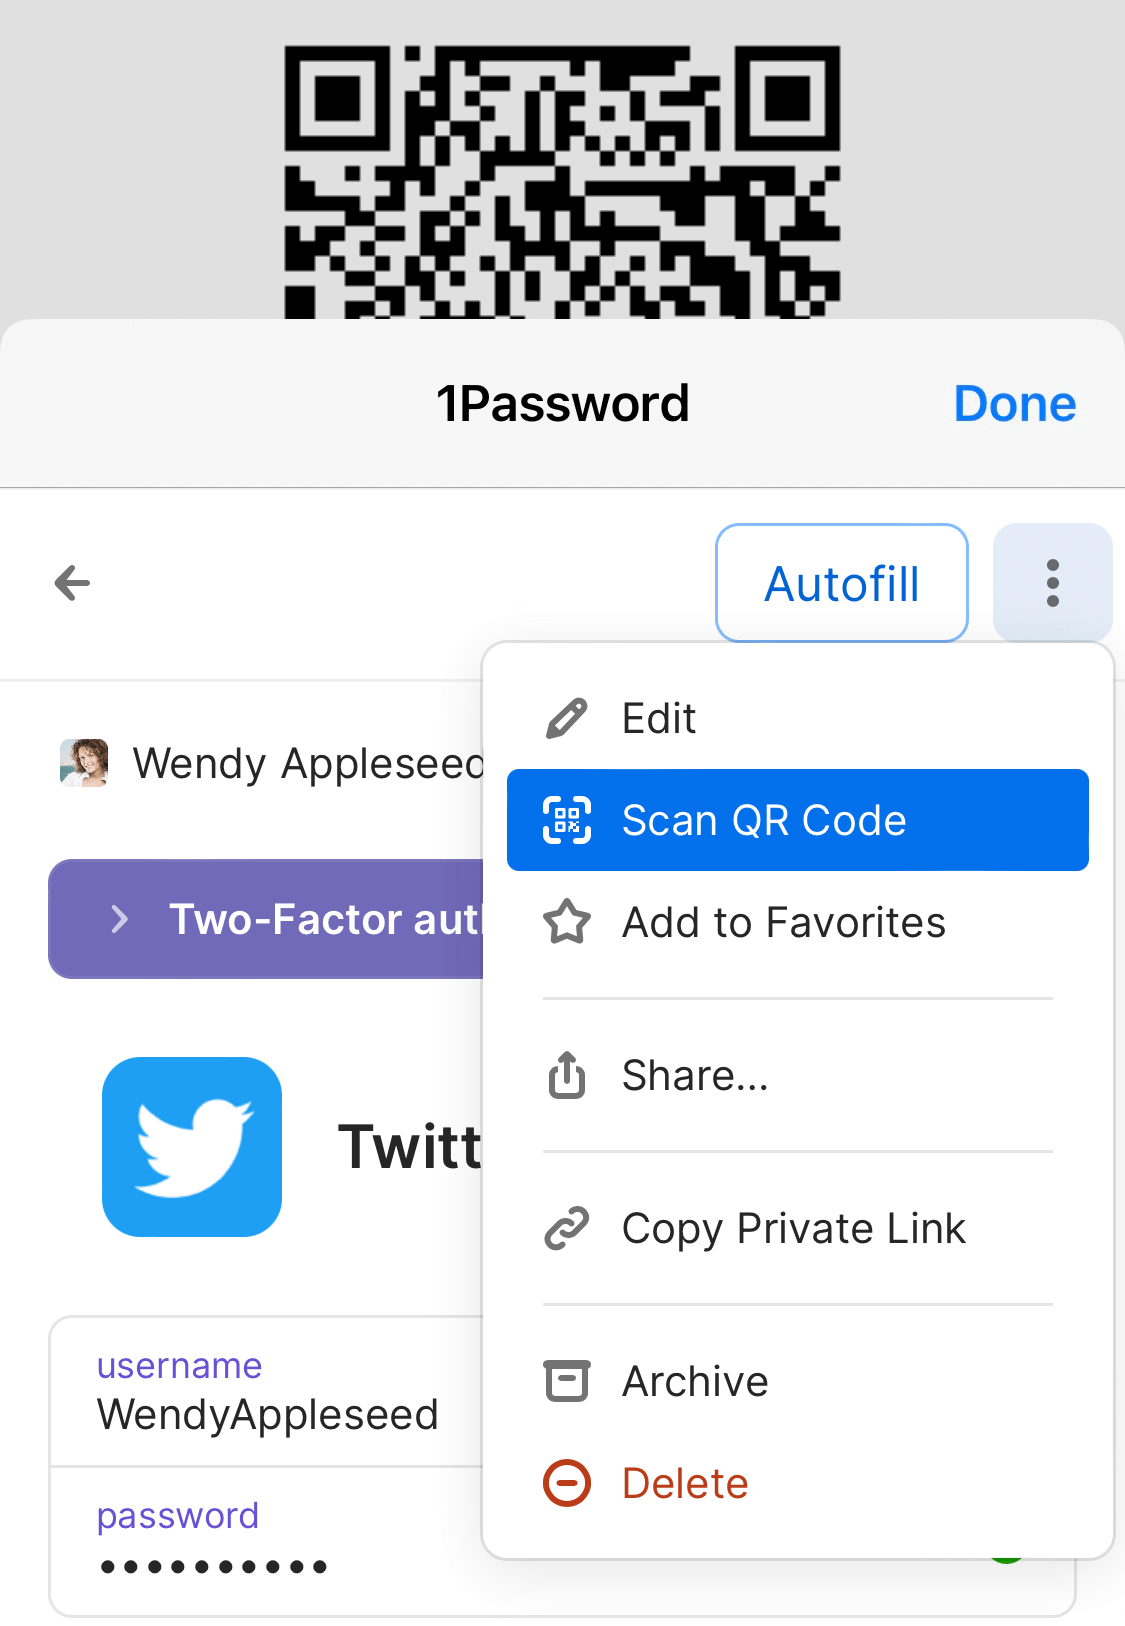 The 1Password pop-up in Safari showing an item with the Scan QR Code option selected.